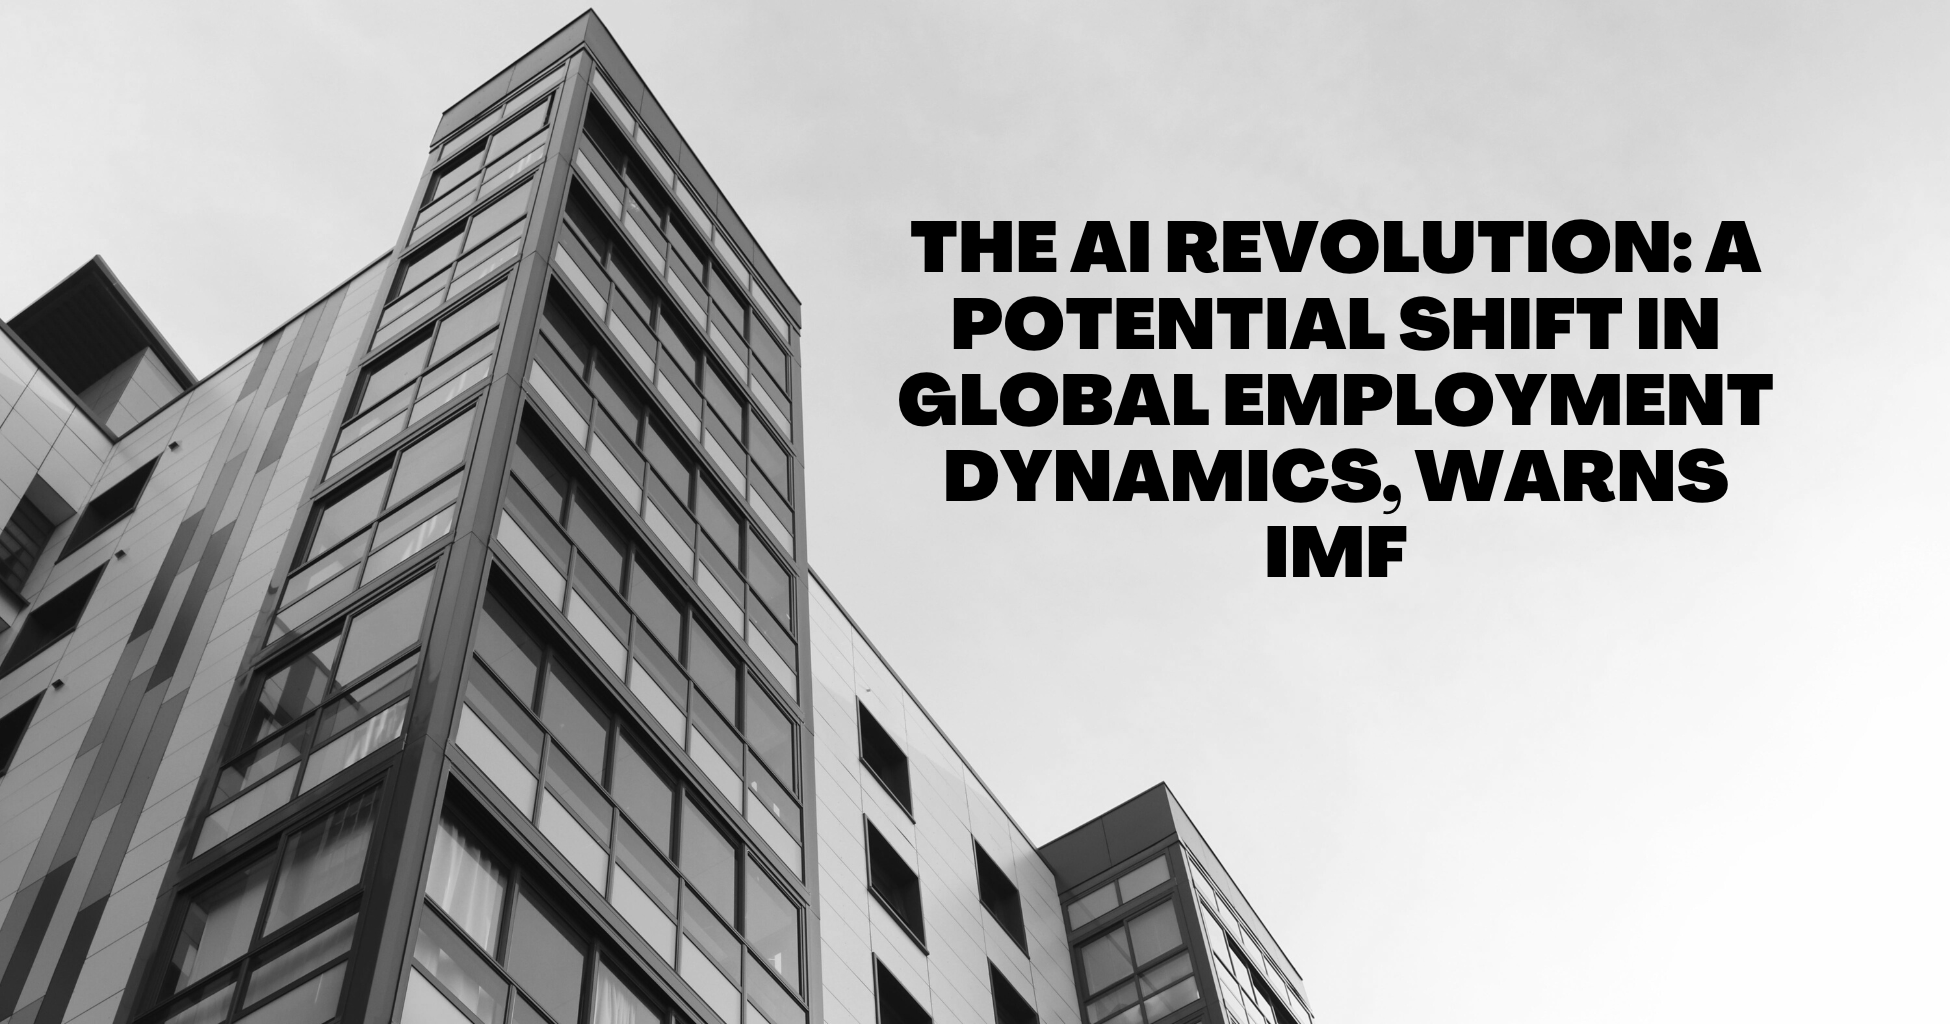 The AI Revolution A Potential Shift in Global Employment Dynamics, Warns IMF